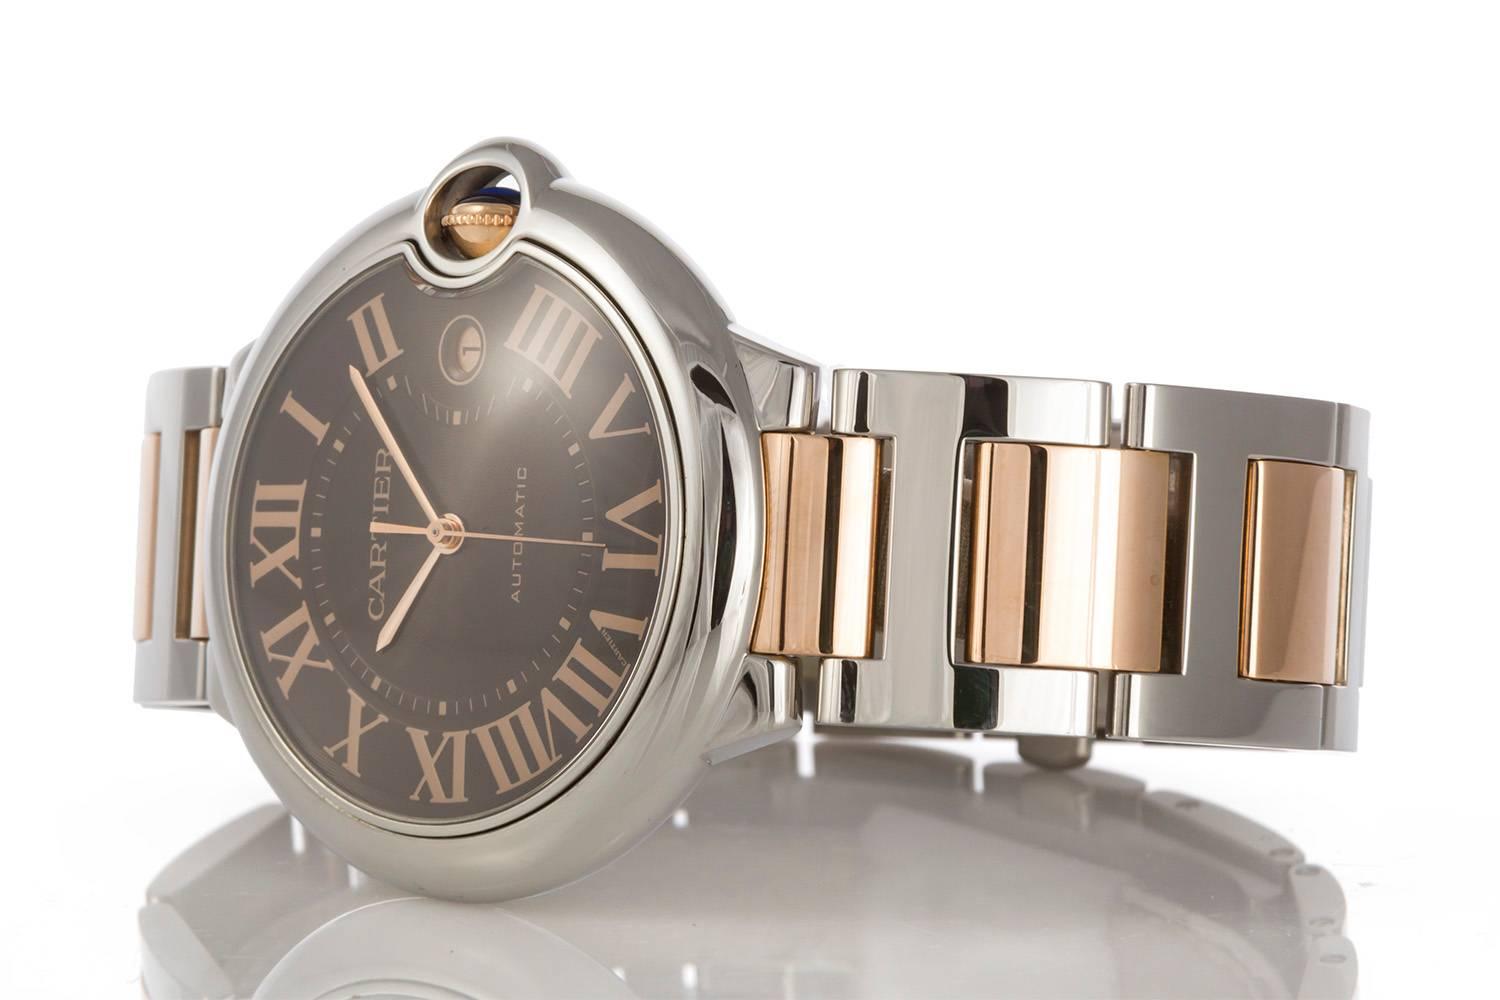 Authentic Cartier 18k Rose Gold & Steel Chocolate Ballon Bleu Automatic Watch. This watch features a 42mm case and beautiful chocolate roman dial. This watch will fit up to a 7.25